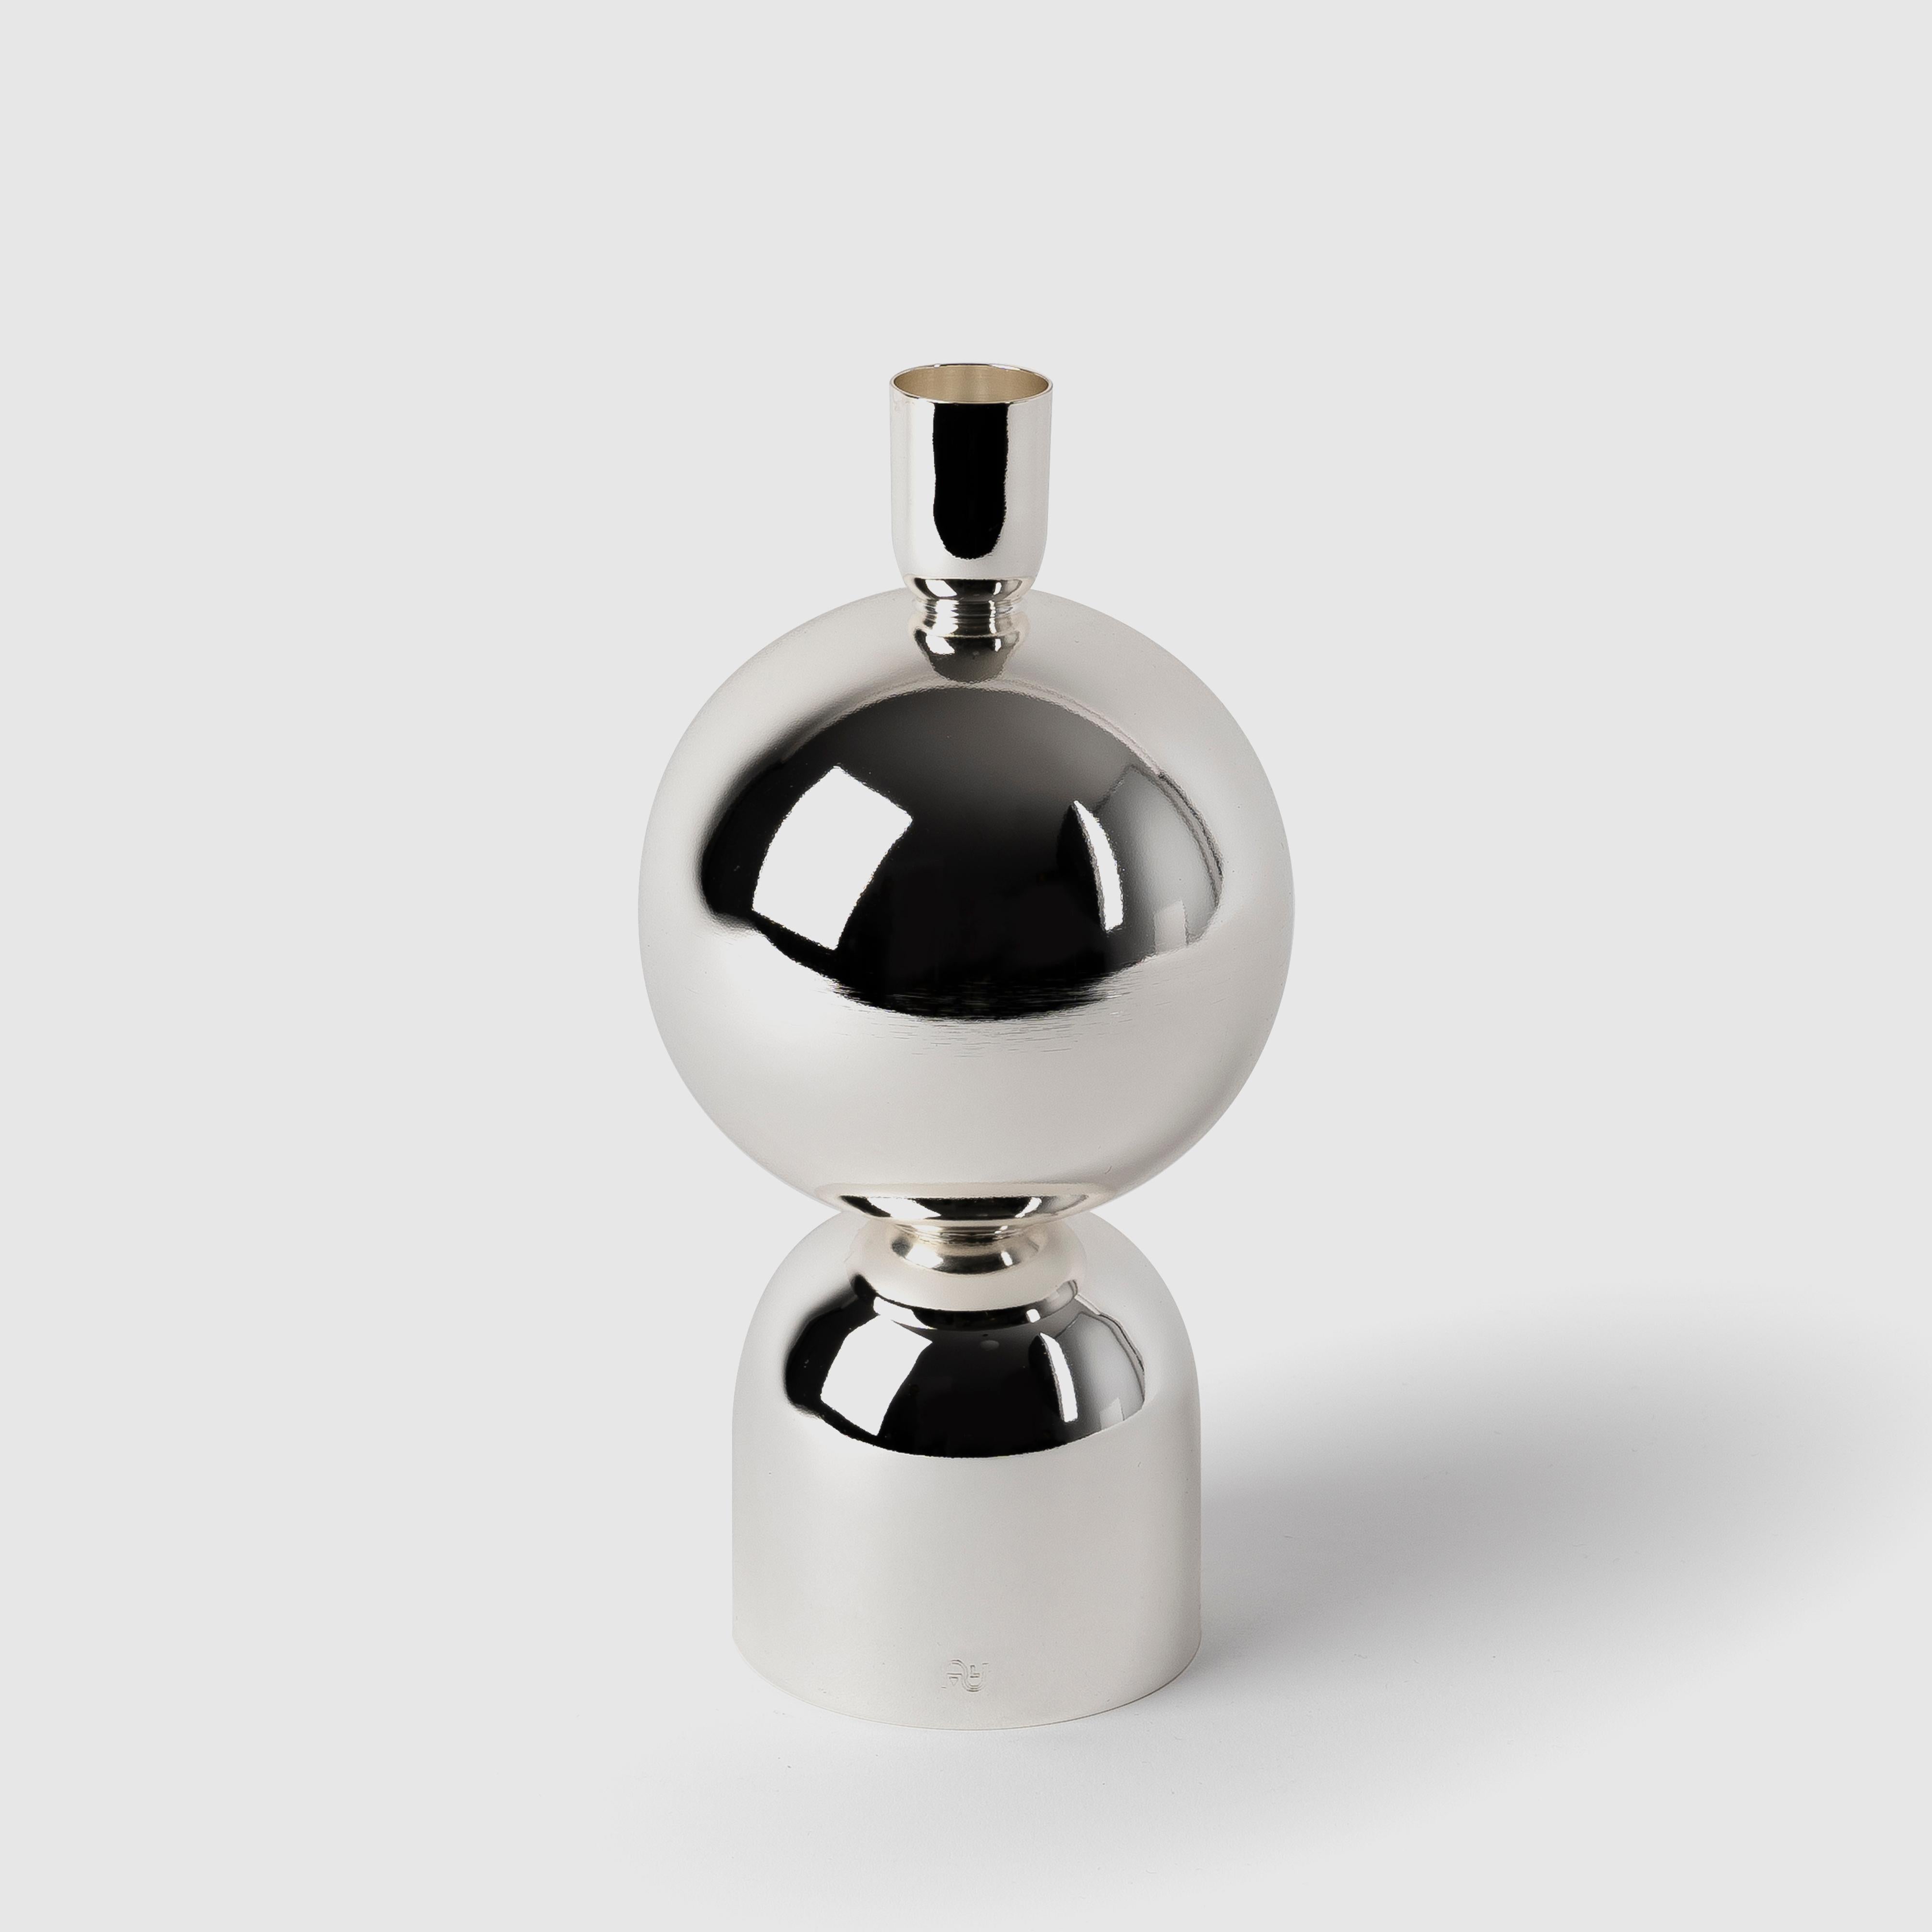 Kubbe collection was designed with inspiration from the domes of the courtyards, shops and workshops of the Grand Bazaar, which has been the center of silver-smiting in Istanbul for centuries. In the collection, the geometric relationships of dome,